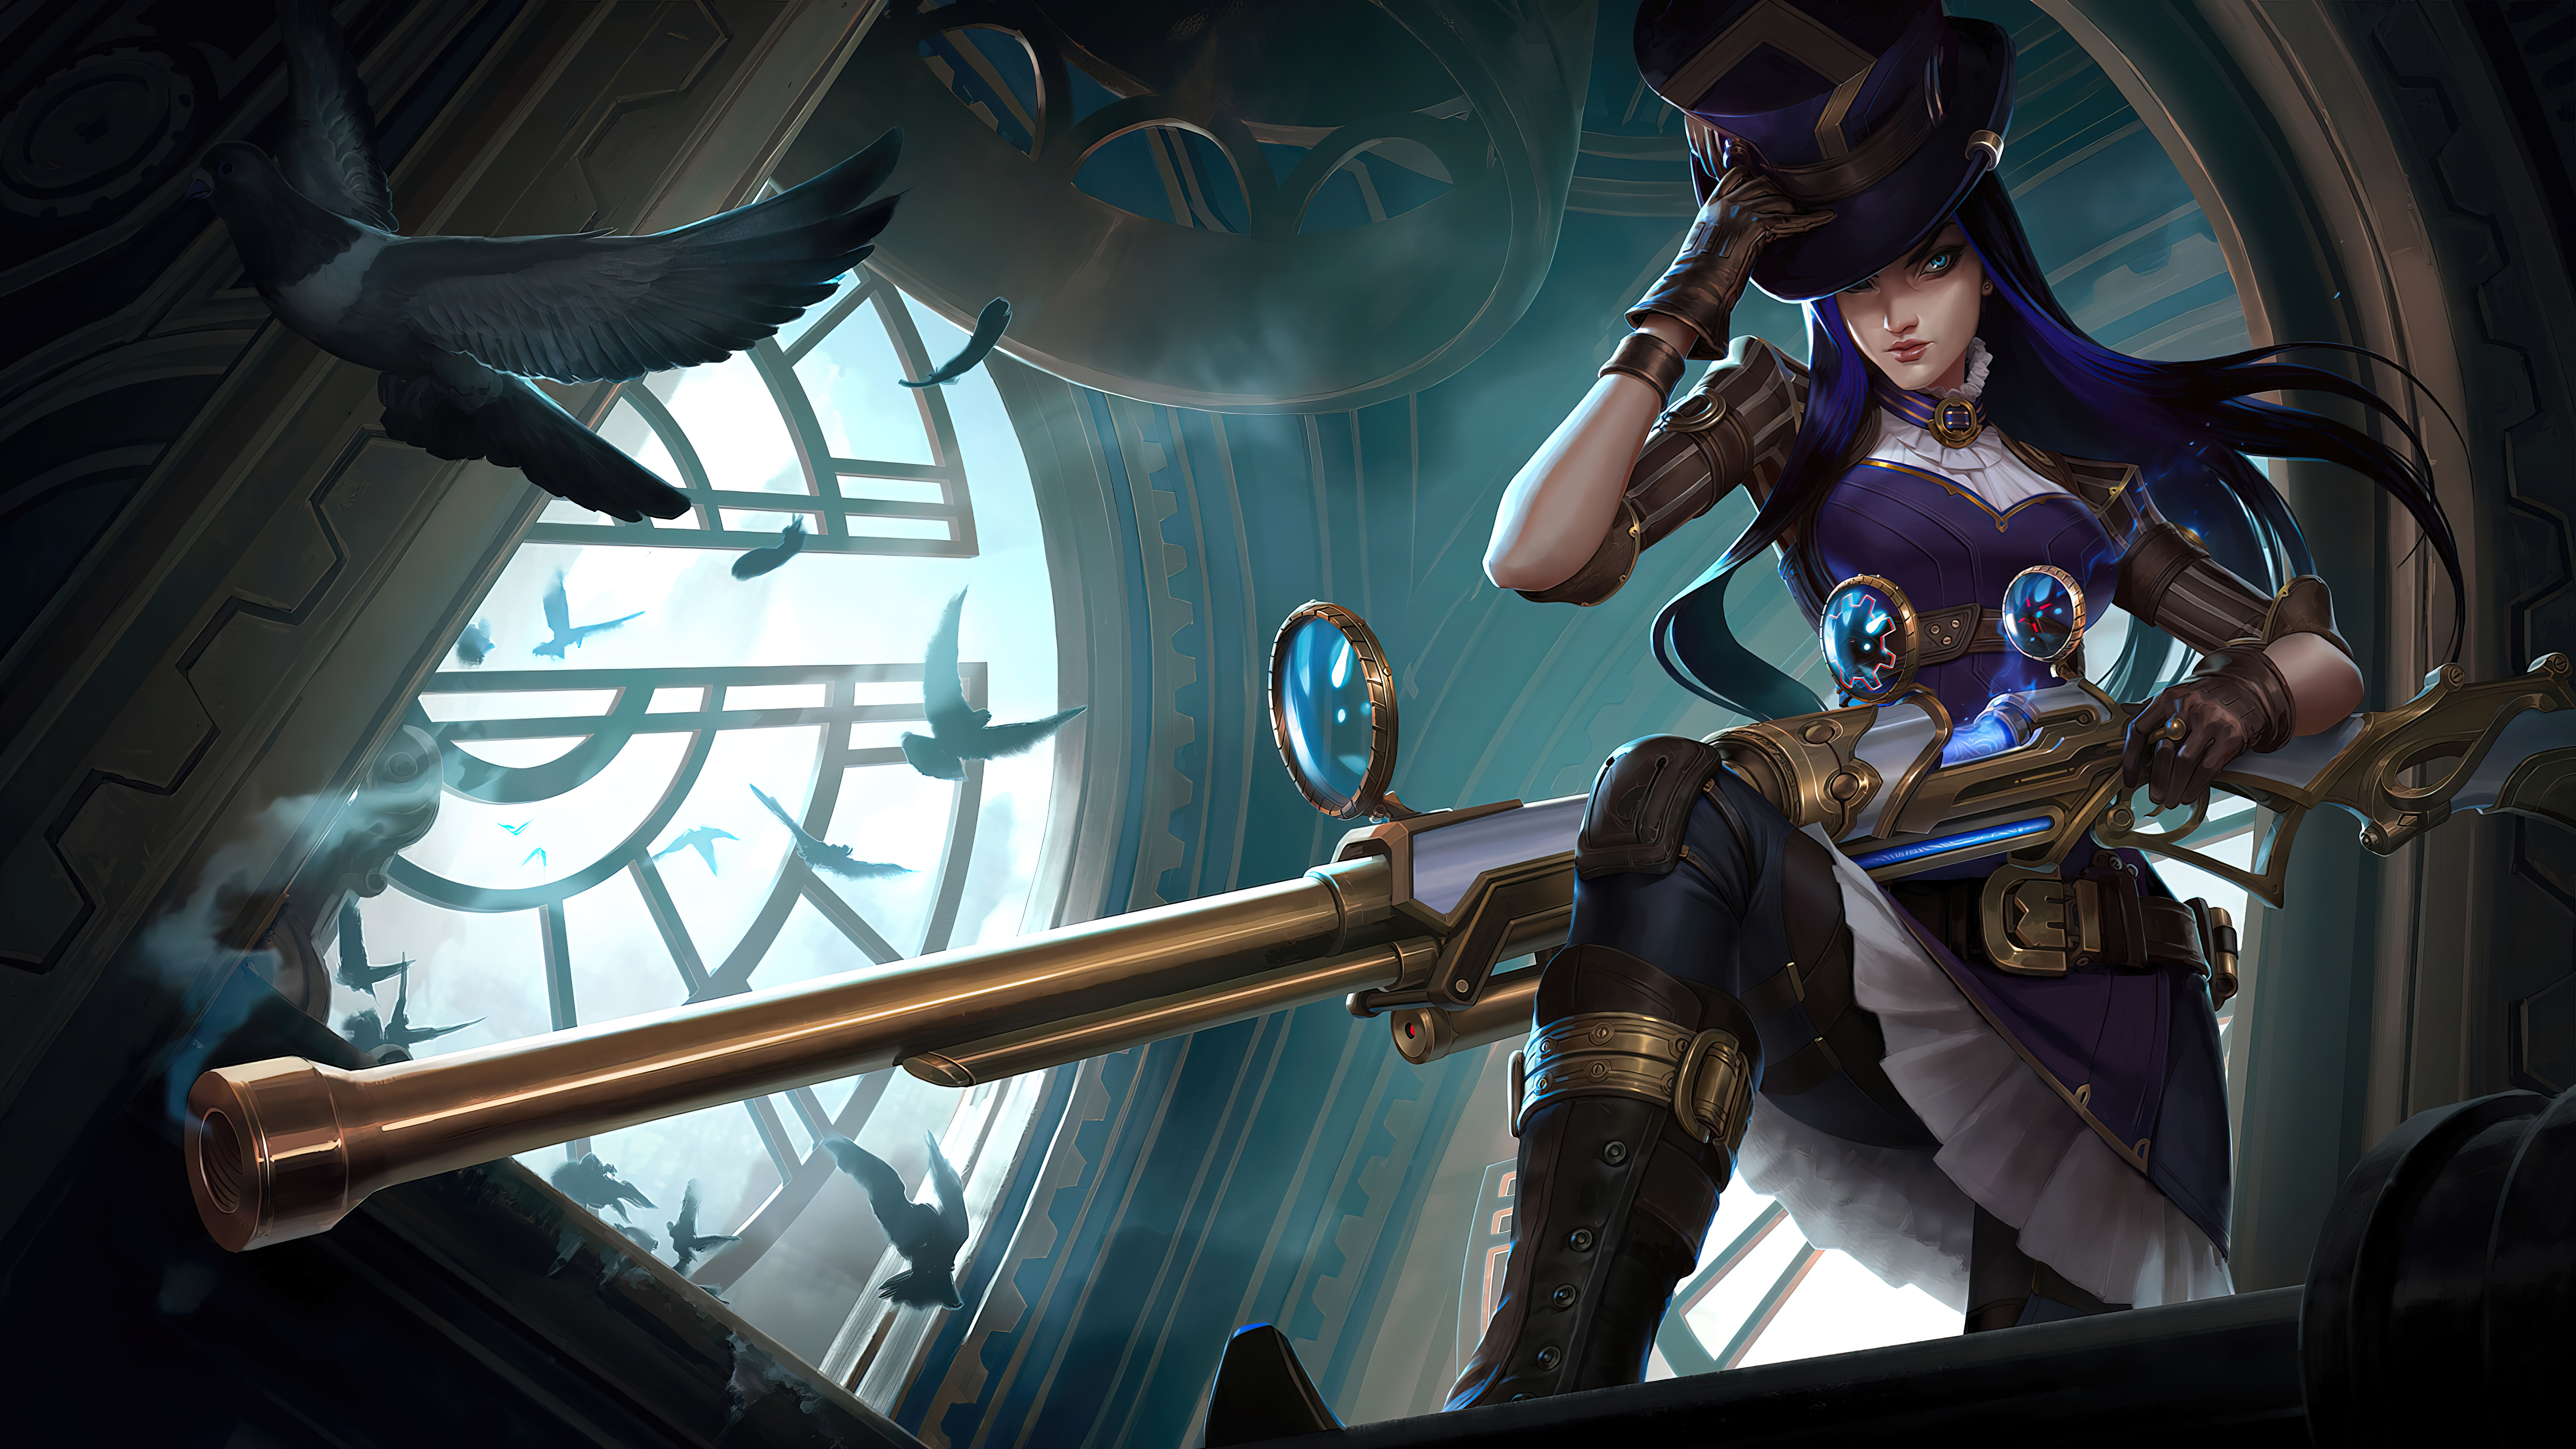 General 7680x4320 Caitlyn (League of Legends) ADC Adcarry digital art GZG 4K League of Legends Riot Games